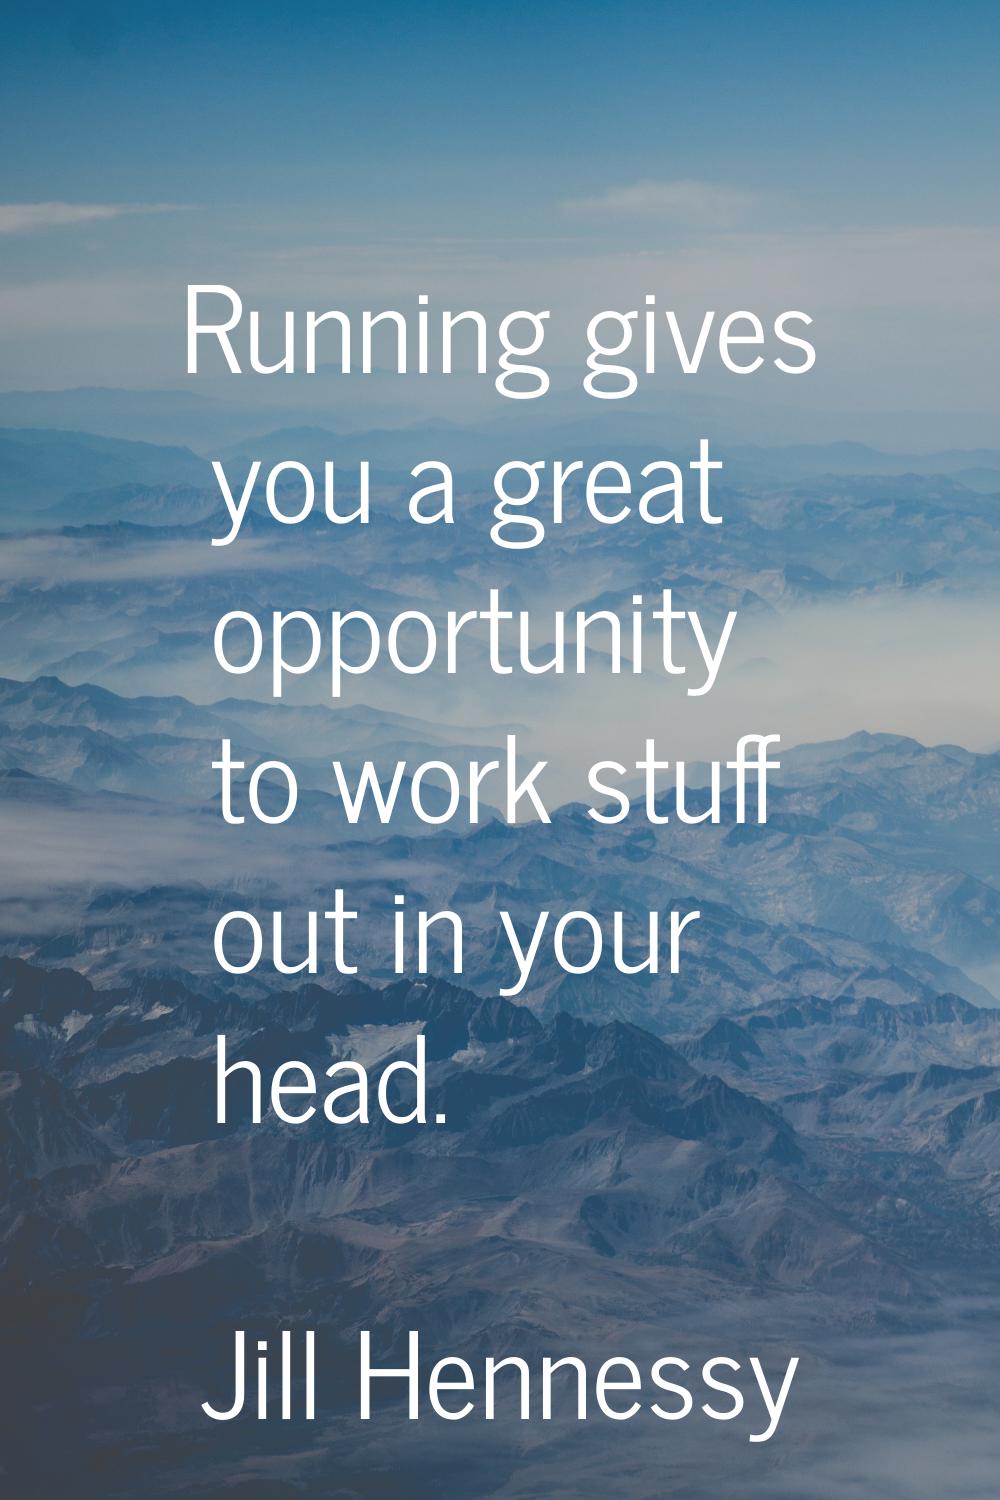 Running gives you a great opportunity to work stuff out in your head.